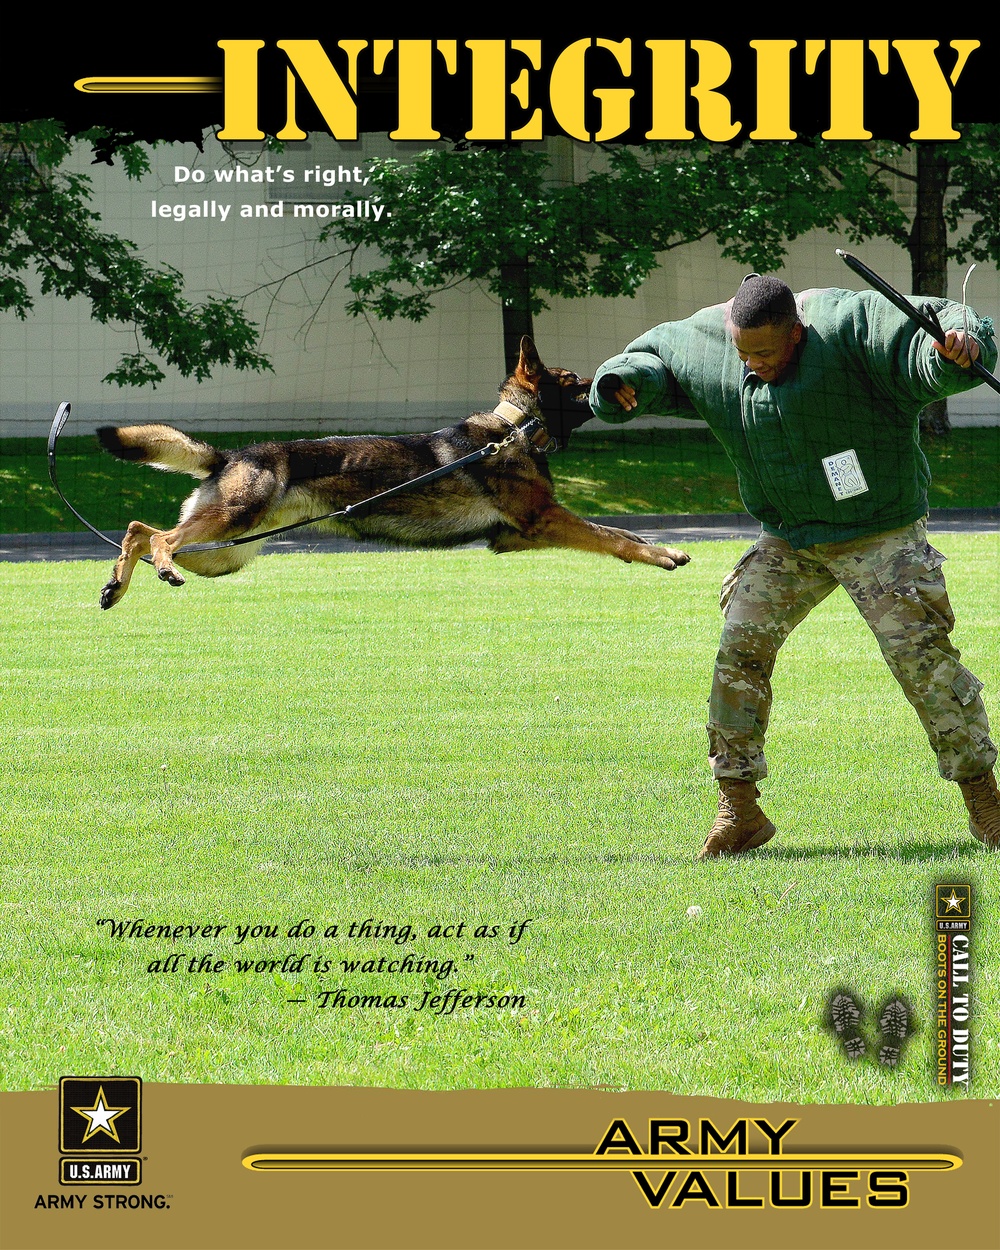 Army values - Integrity